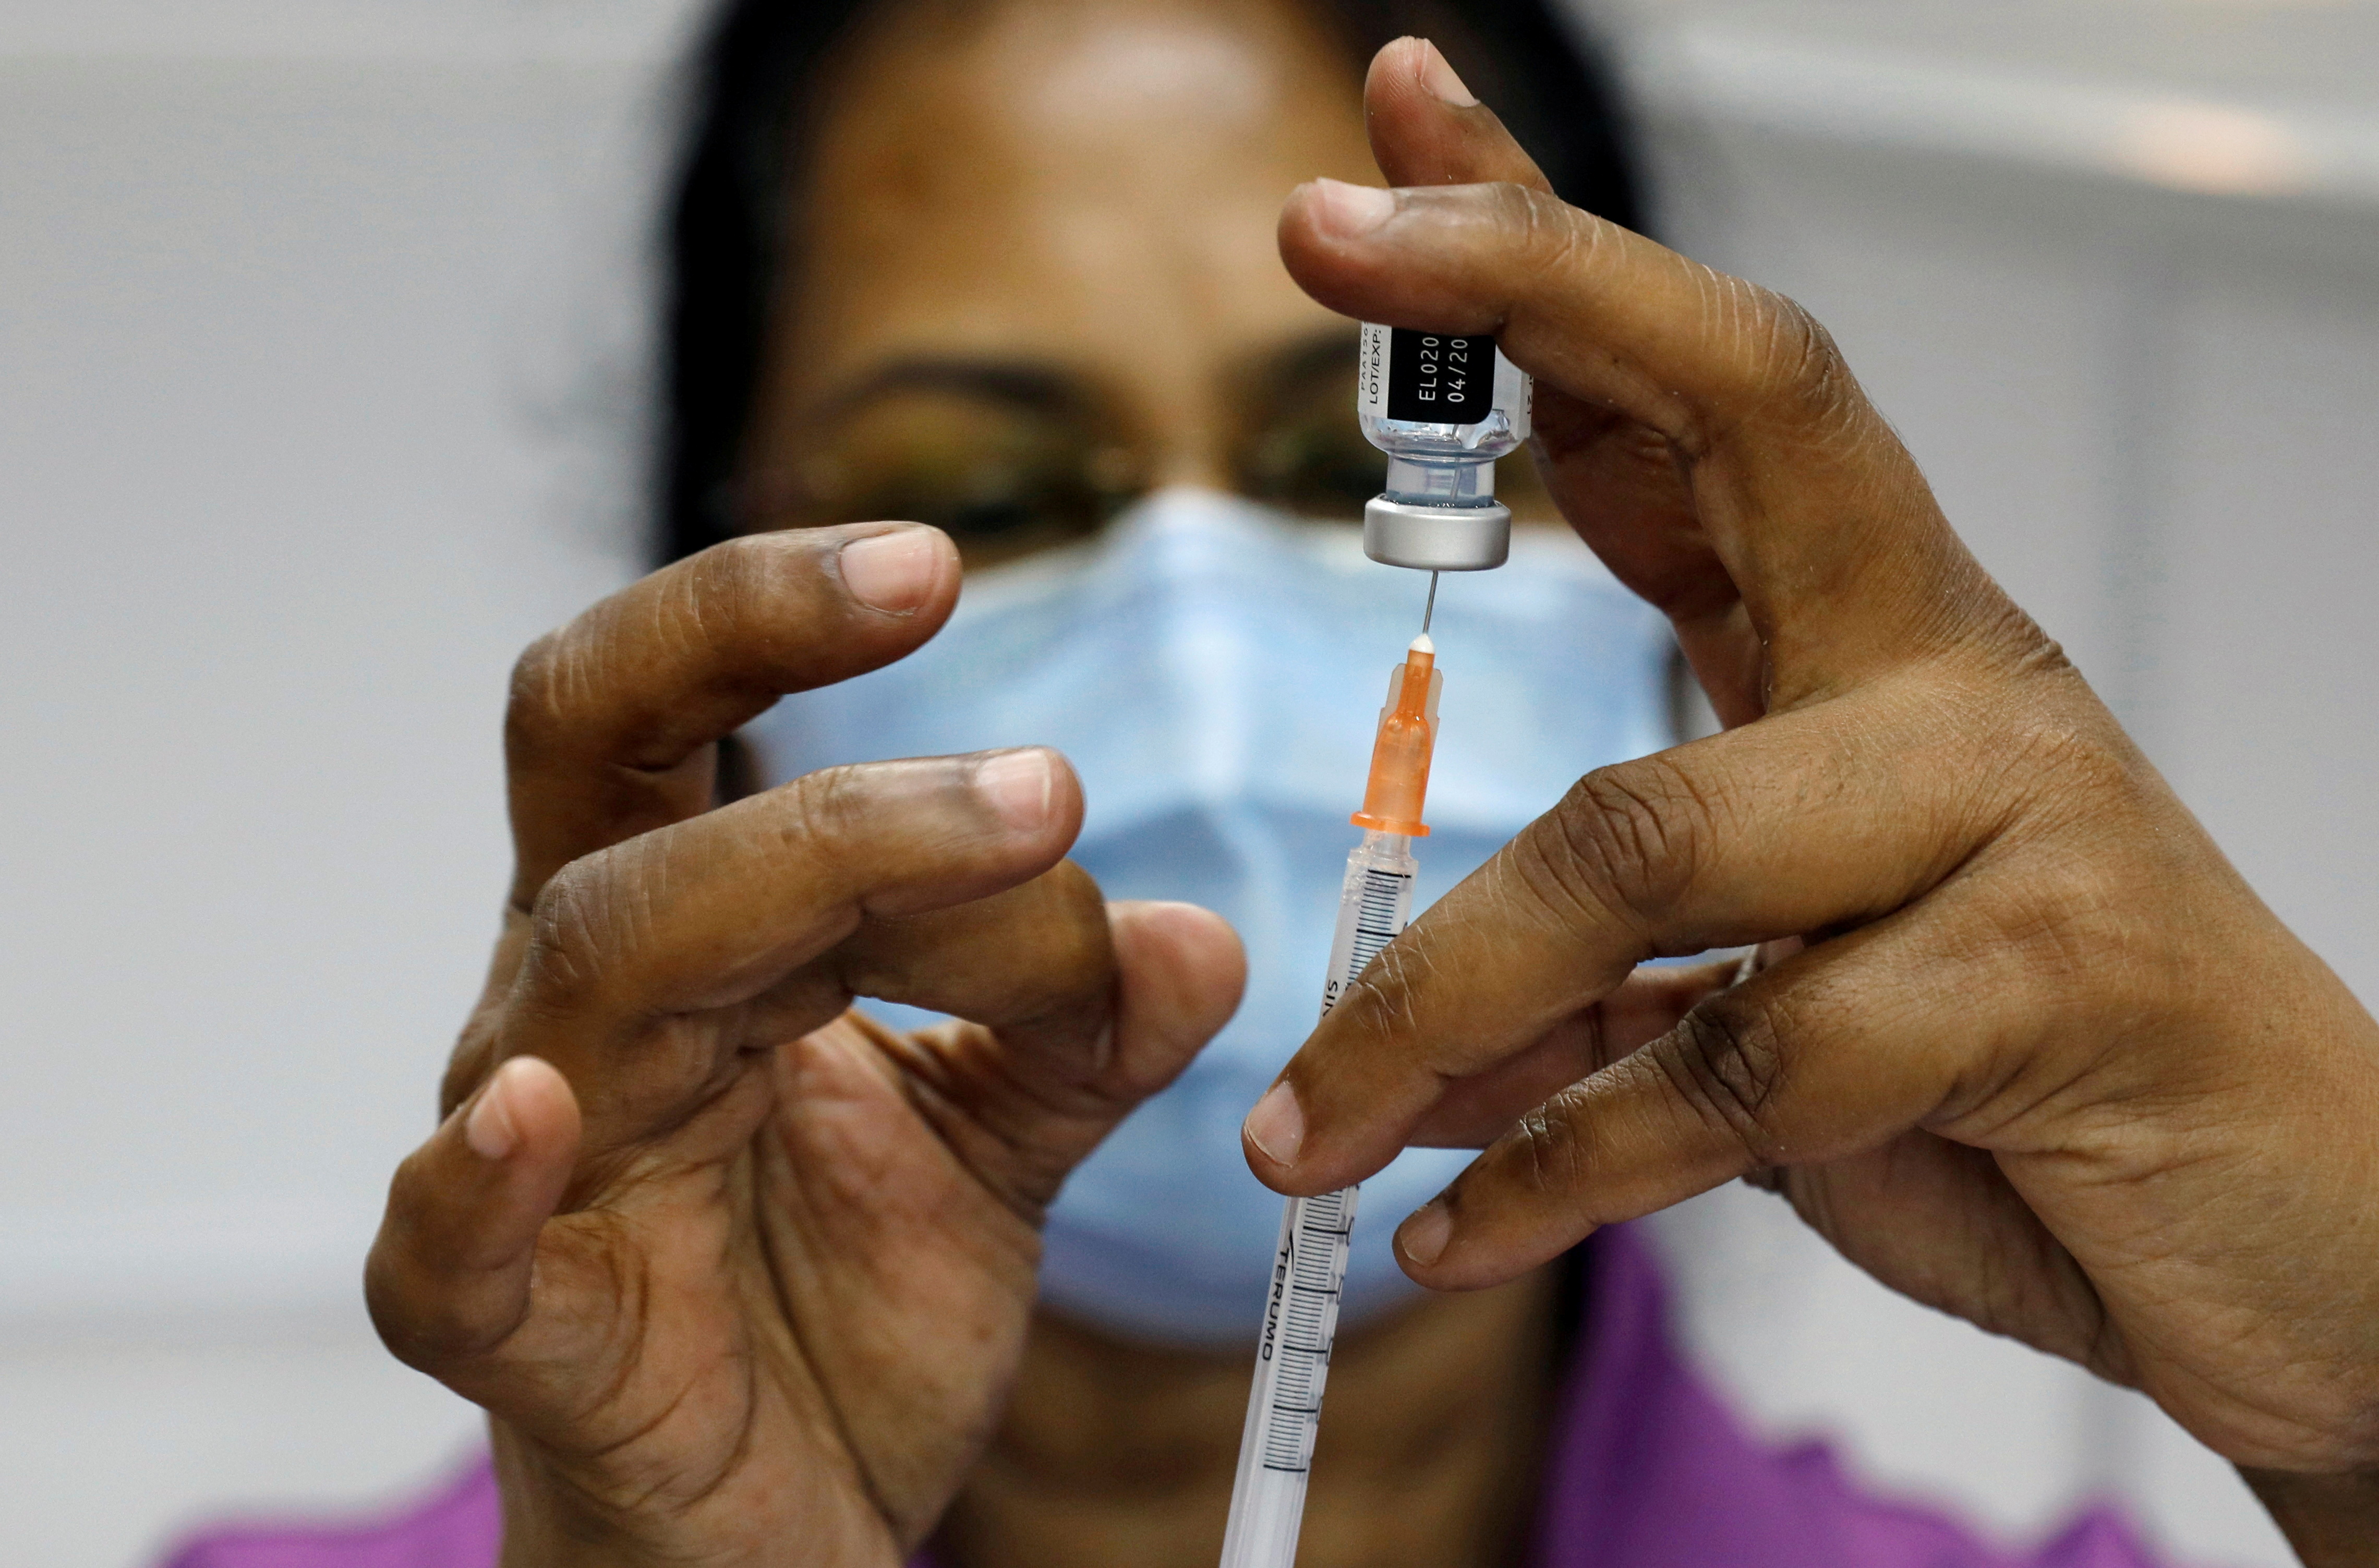 A medical worker prepares a syringe at a coronavirus disease (COVID-19) vaccination center in Singapore, March 8, 2021. REUTERS/Edgar Su/File Photo